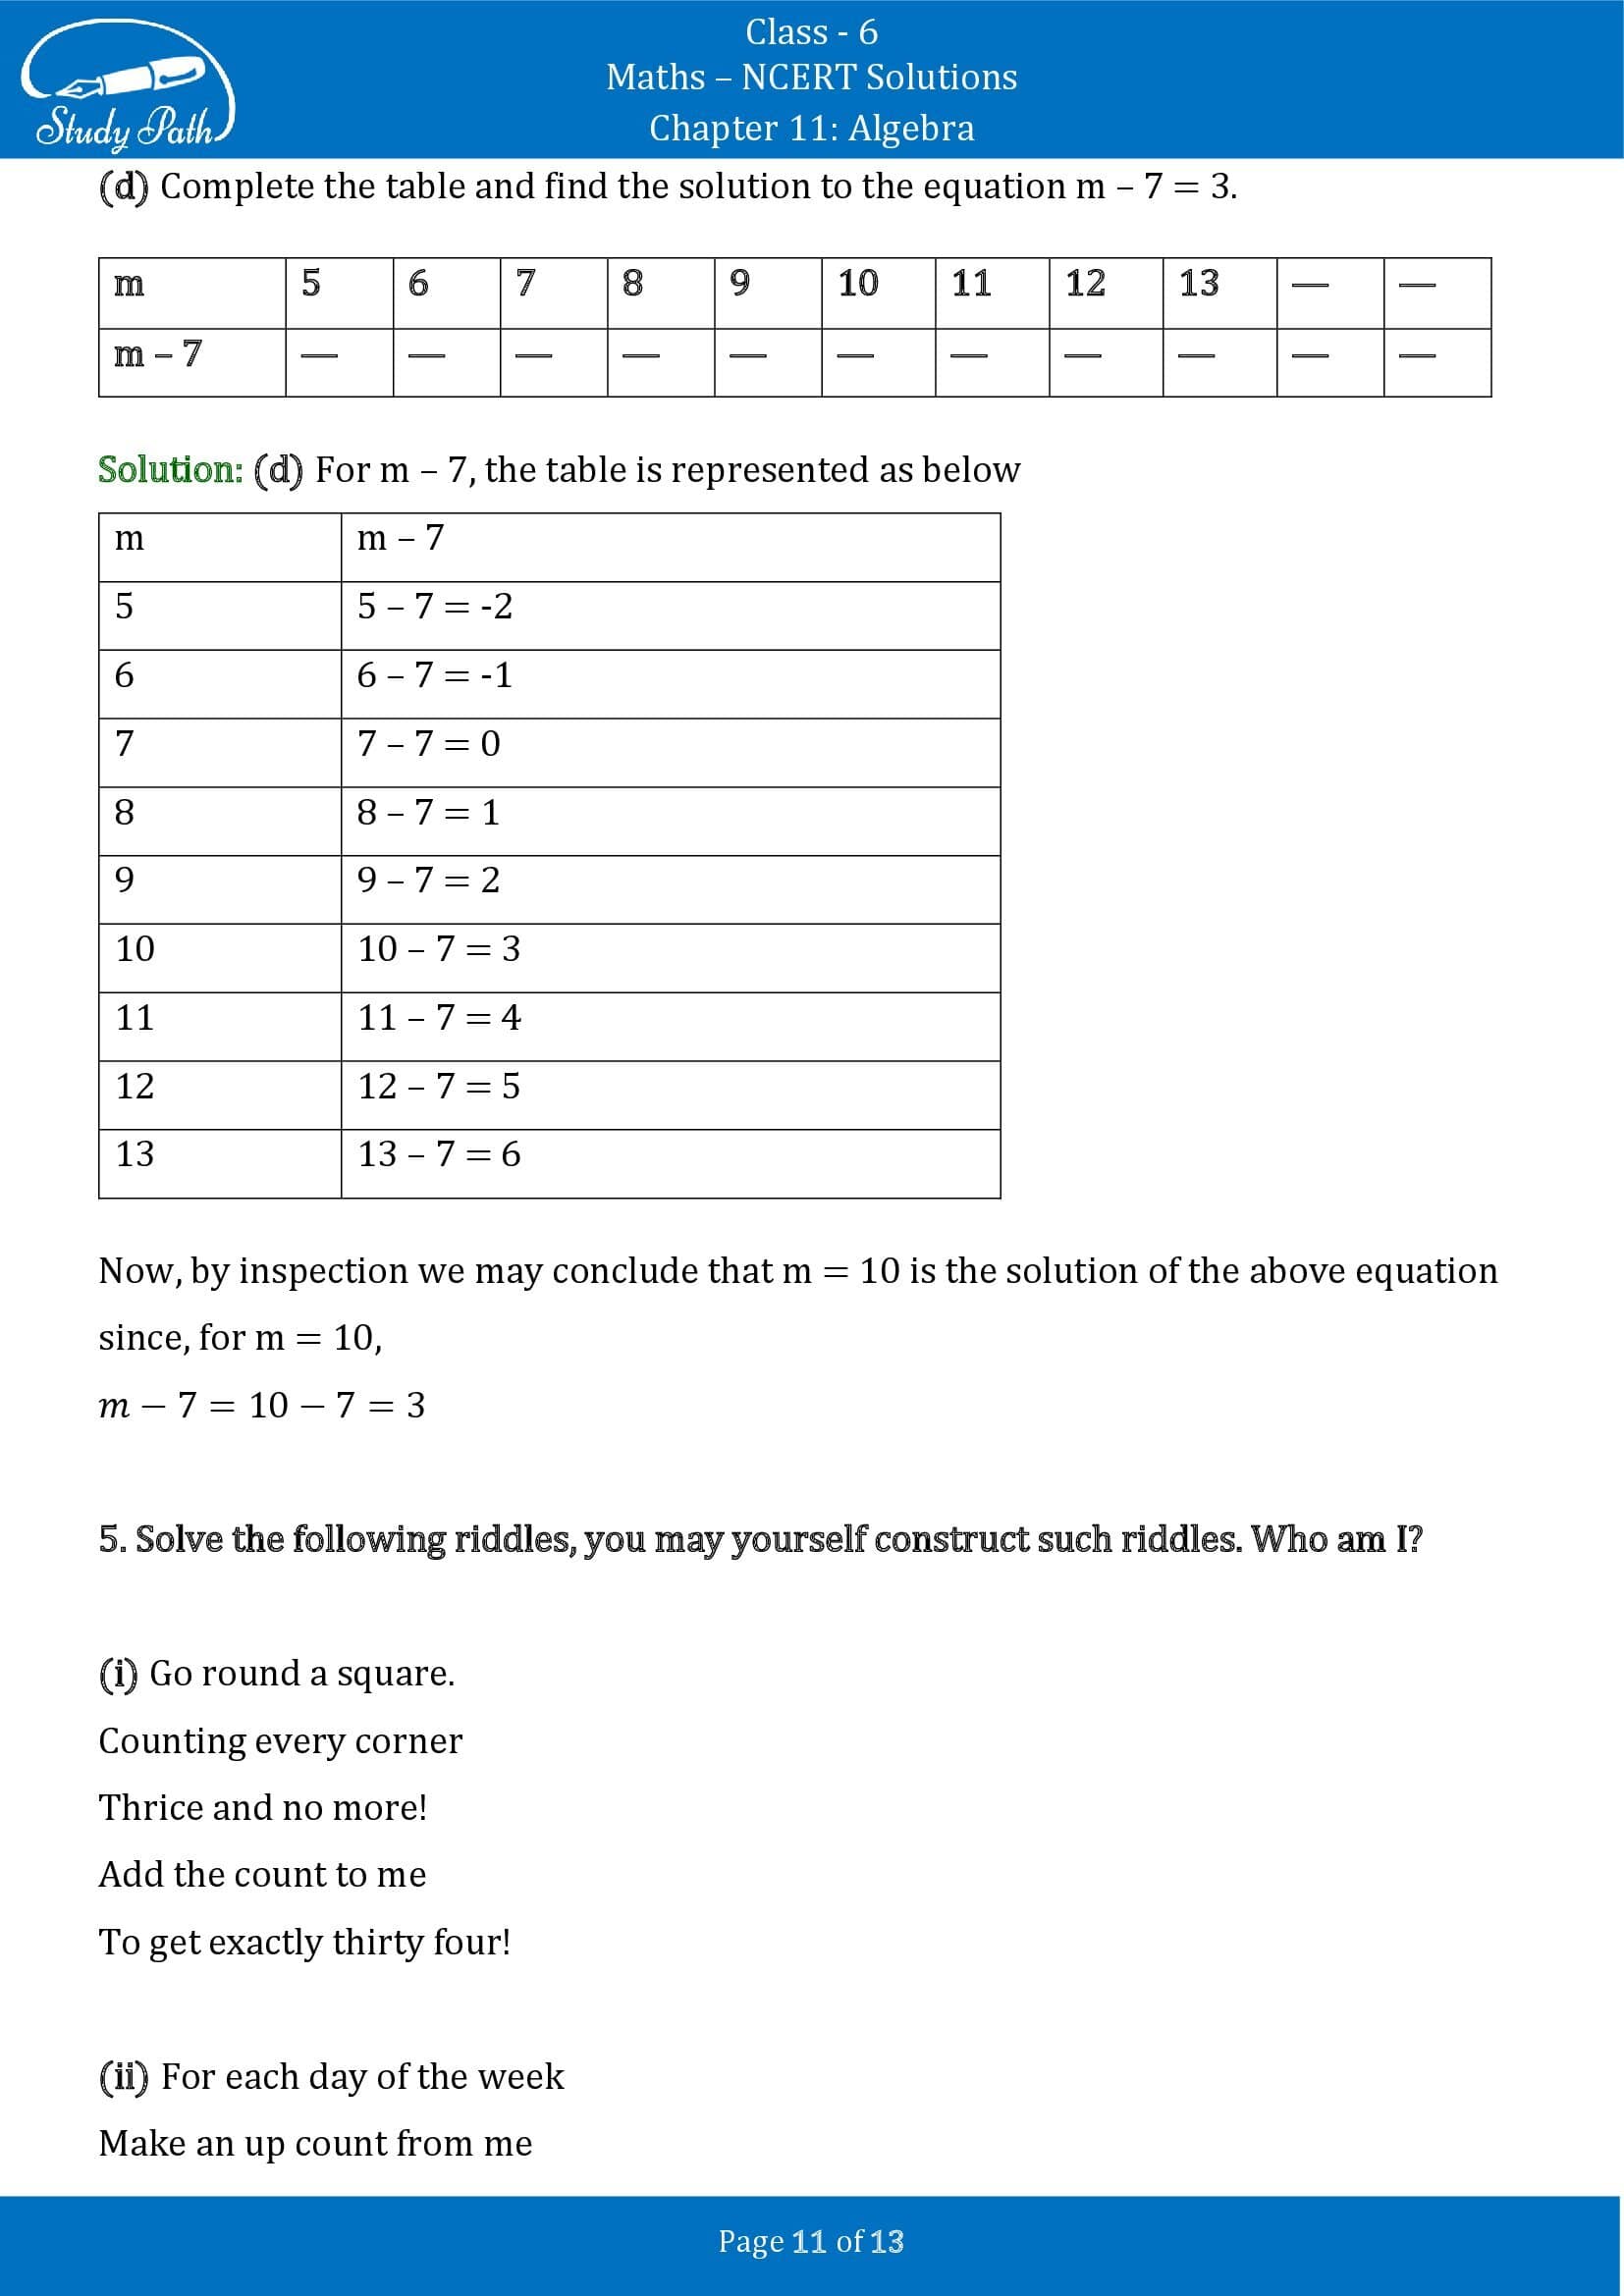 NCERT Solutions for Class 6 Maths Chapter 11 Algebra Exercise 11.5 00011